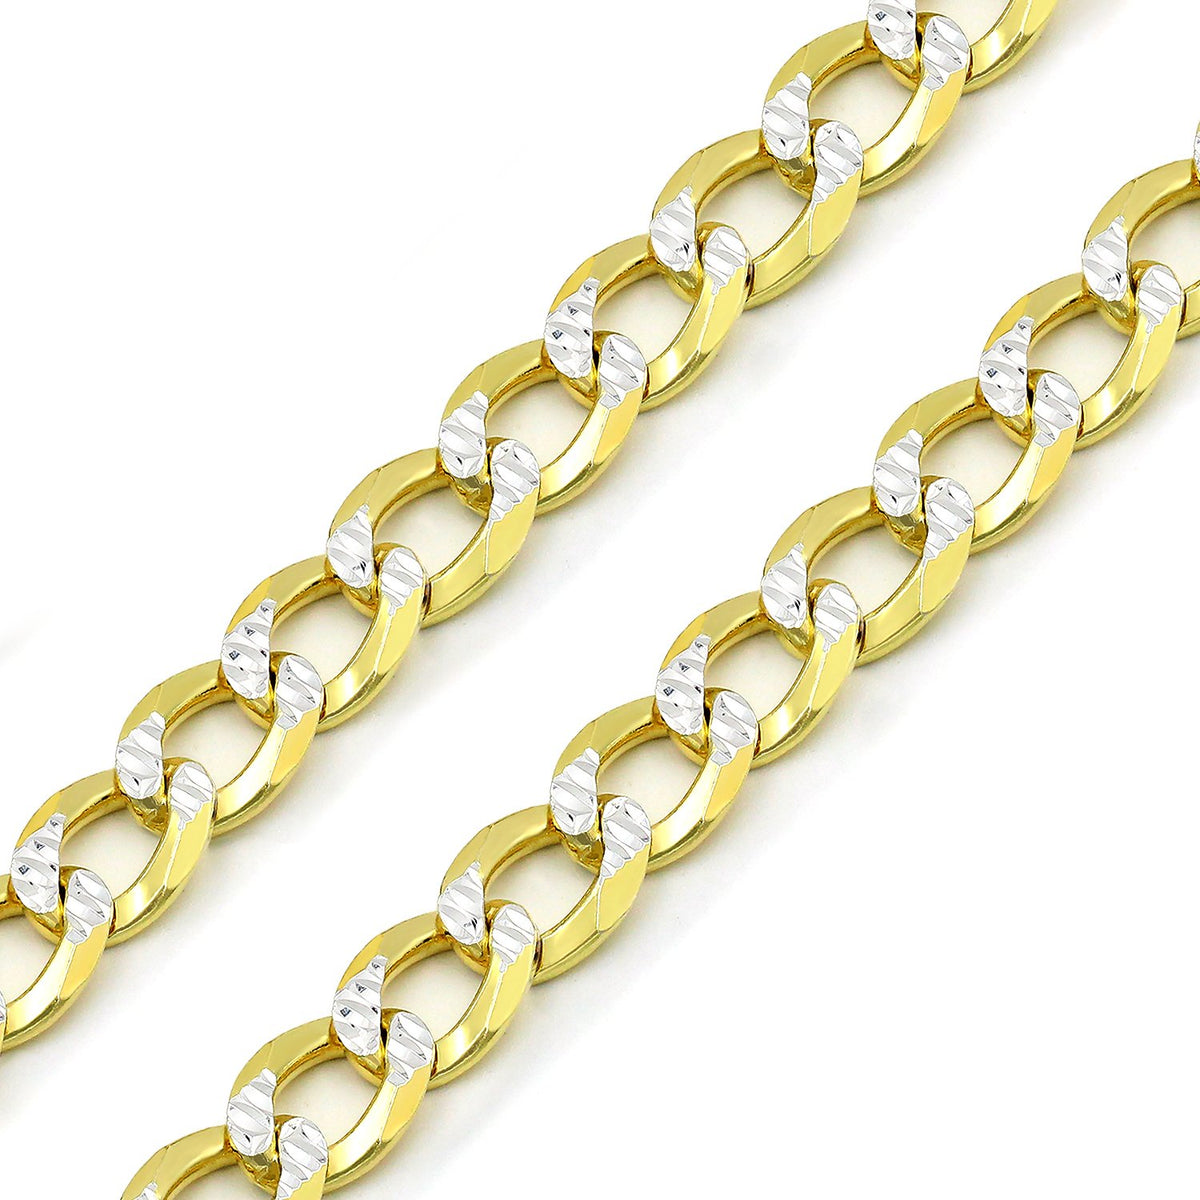 925 Sterling Silver Solid Cuban 10.5mm Diamond Cut Pave Gold Plated Curb Link Chain